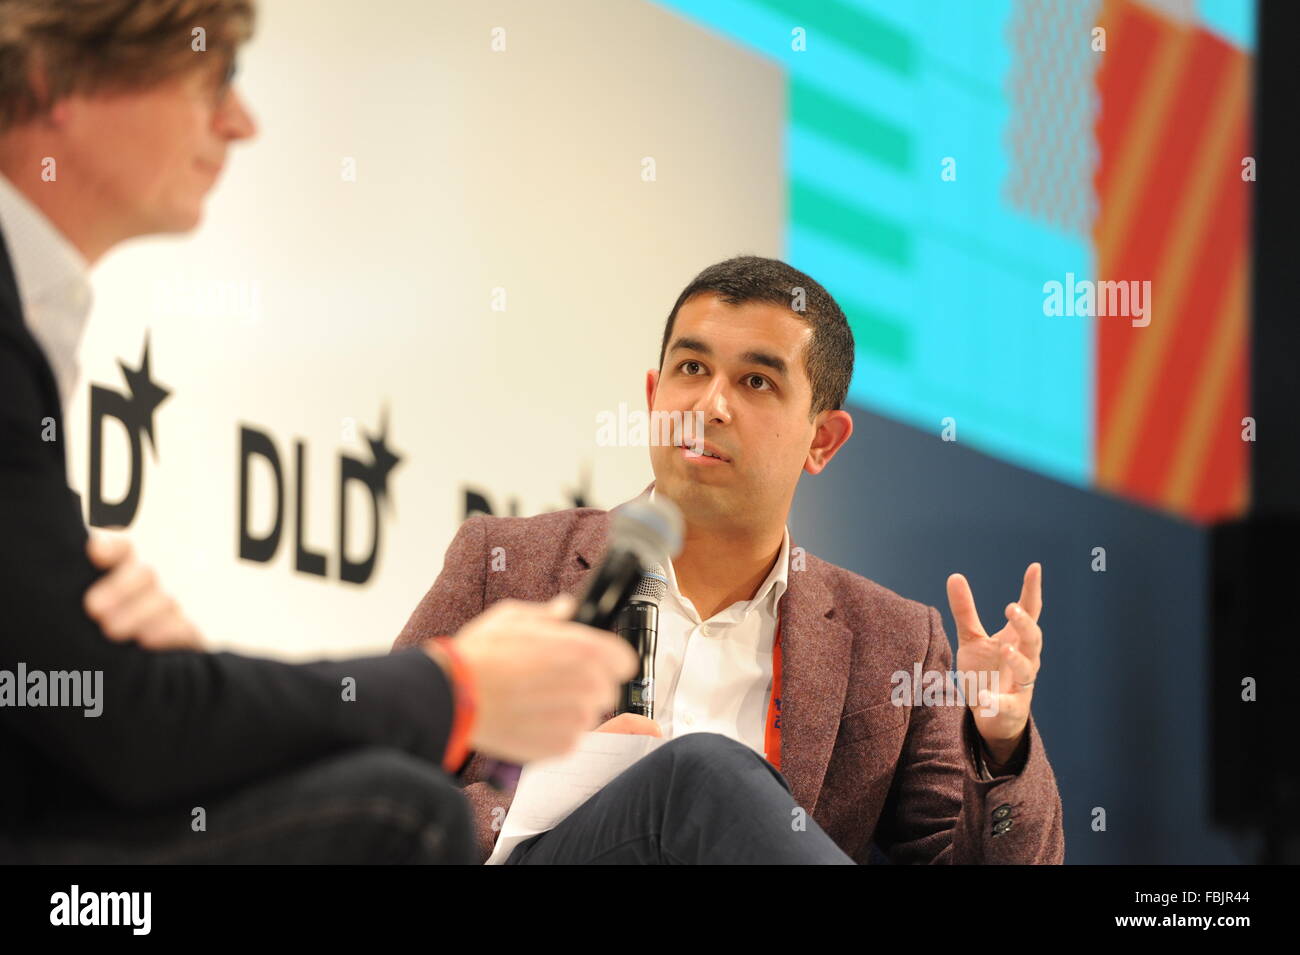 MUNICH/GERMANY - JANUARY 17: Murad Ahmed (Financial Times, r.) talks with Niklas Zennström (Atomico) on a panel discussion during the DLD16 (Digital-Life-Design) Conference at the HVB Forum on January 17, 2016 in Munich, Germany. DLD is a global network of innovation, digitization, science and culture, which connects business, creative and social leaders, opinion formers and influencers for crossover conversation and inspiration.(Photo: picture alliance / Jan Haas) Stock Photo